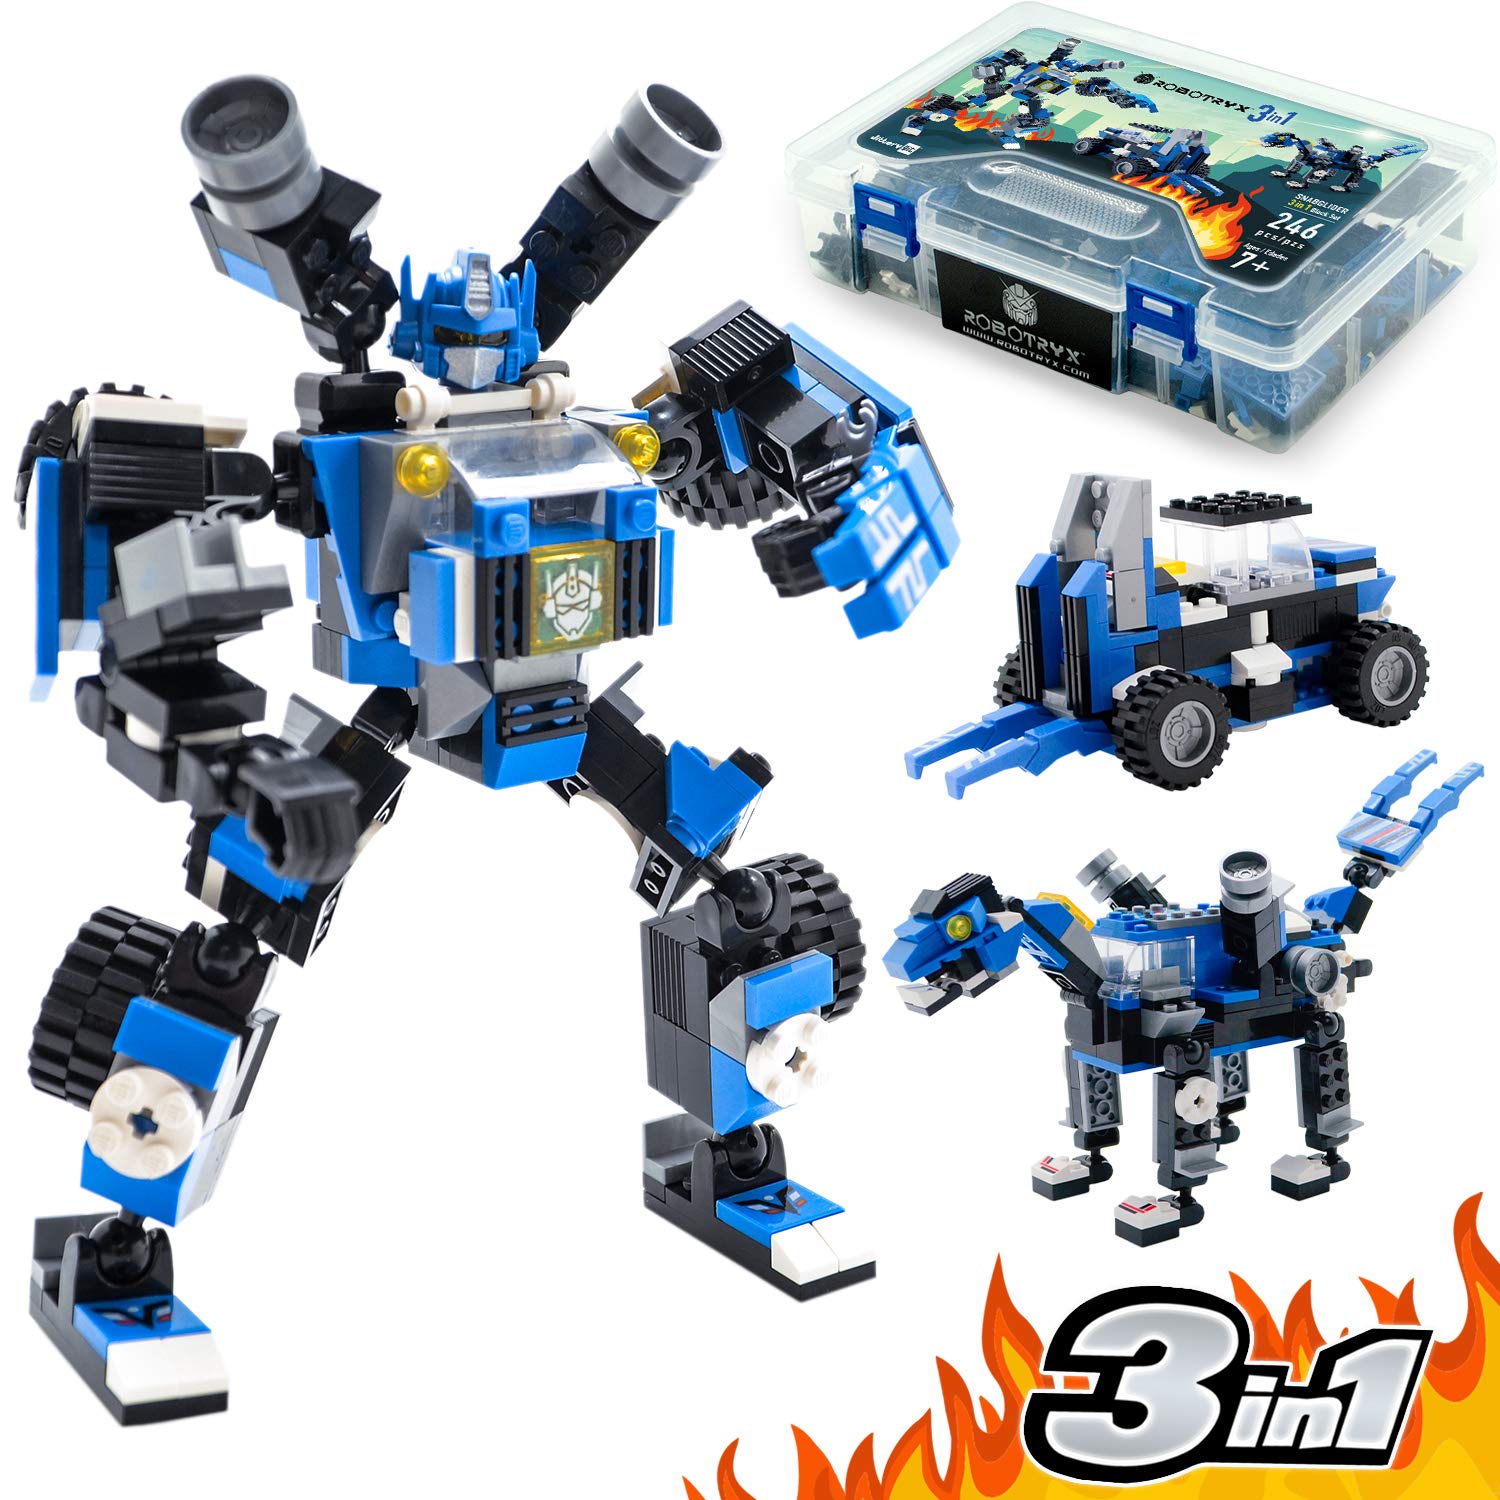 Robot STEM Toy Figure | 3 in 1 Fun Creative Set | Construction Building Toys for Boys and Girls Ages 6-14 Years Old | Best Toy Gift for Kids | Free Poster Kit Included